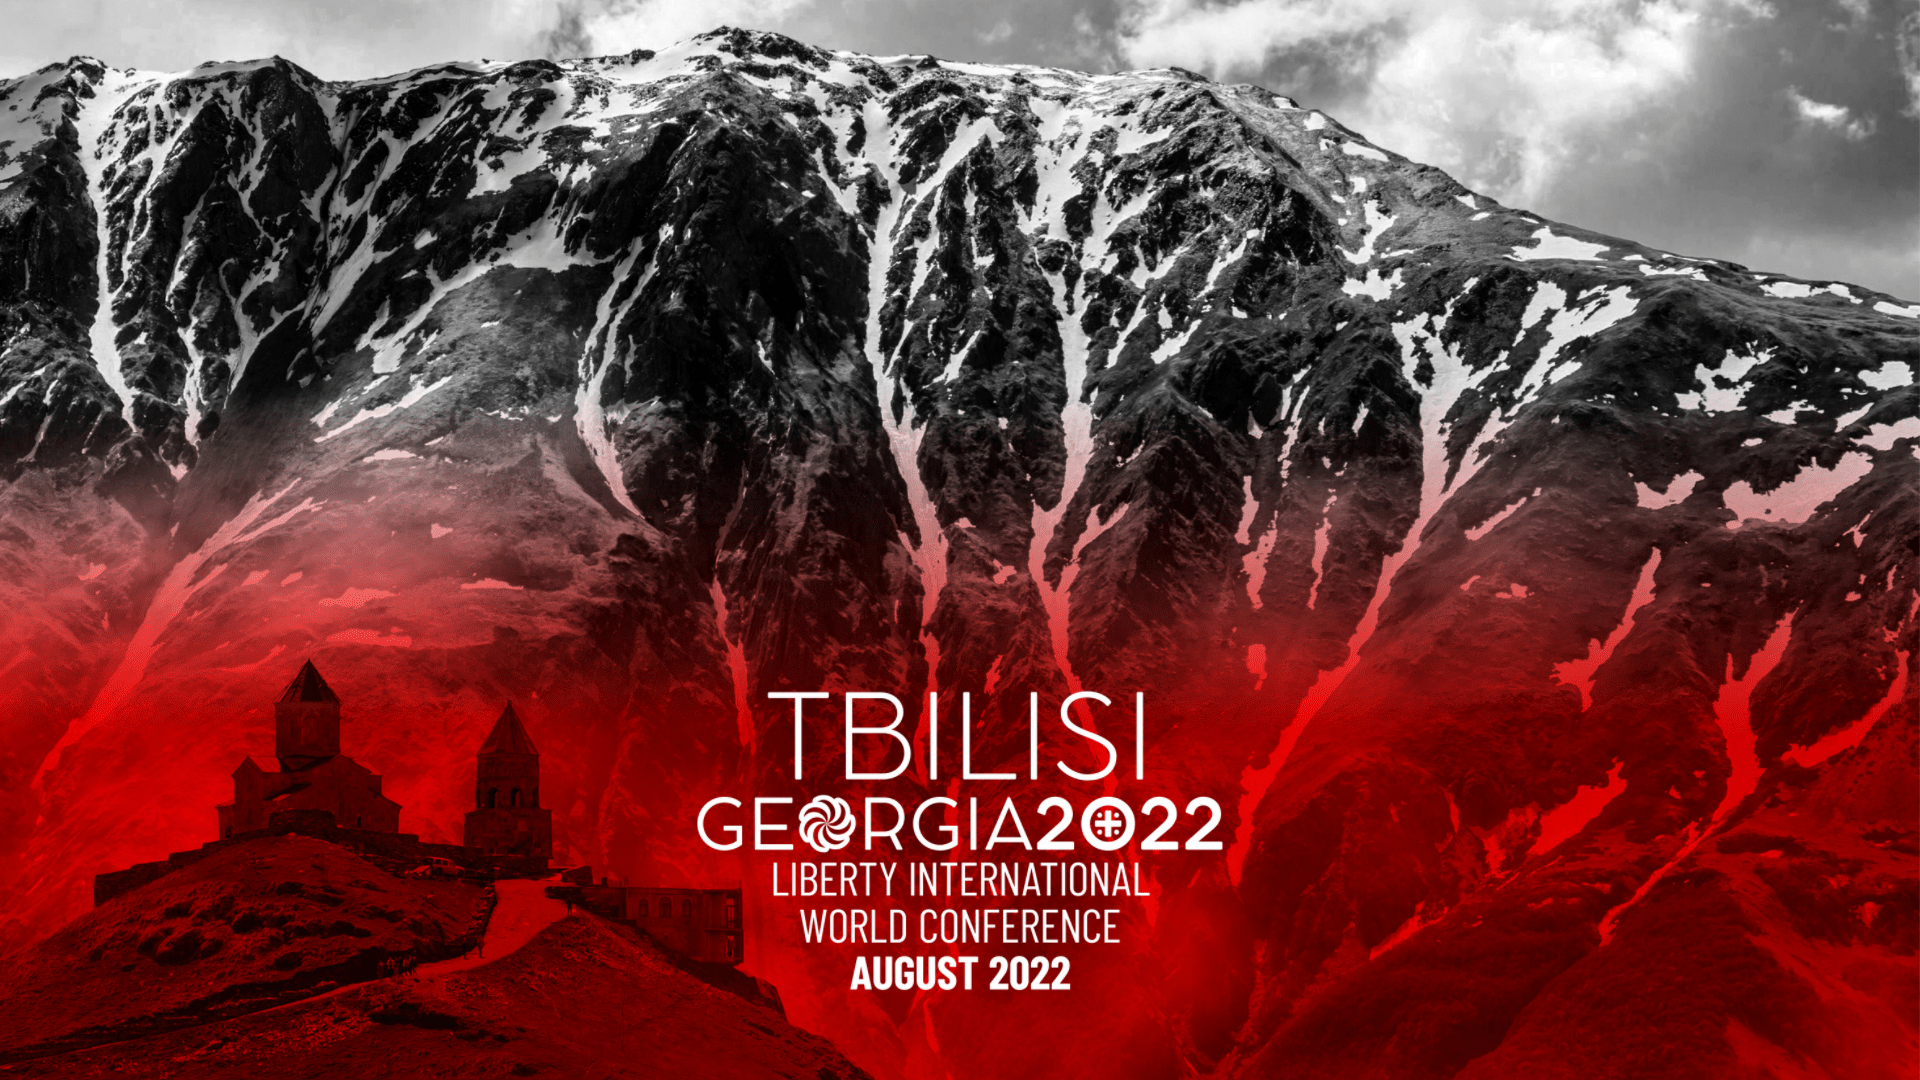 FEF is the official host of Liberty International World Conference Tbilisi 2022!